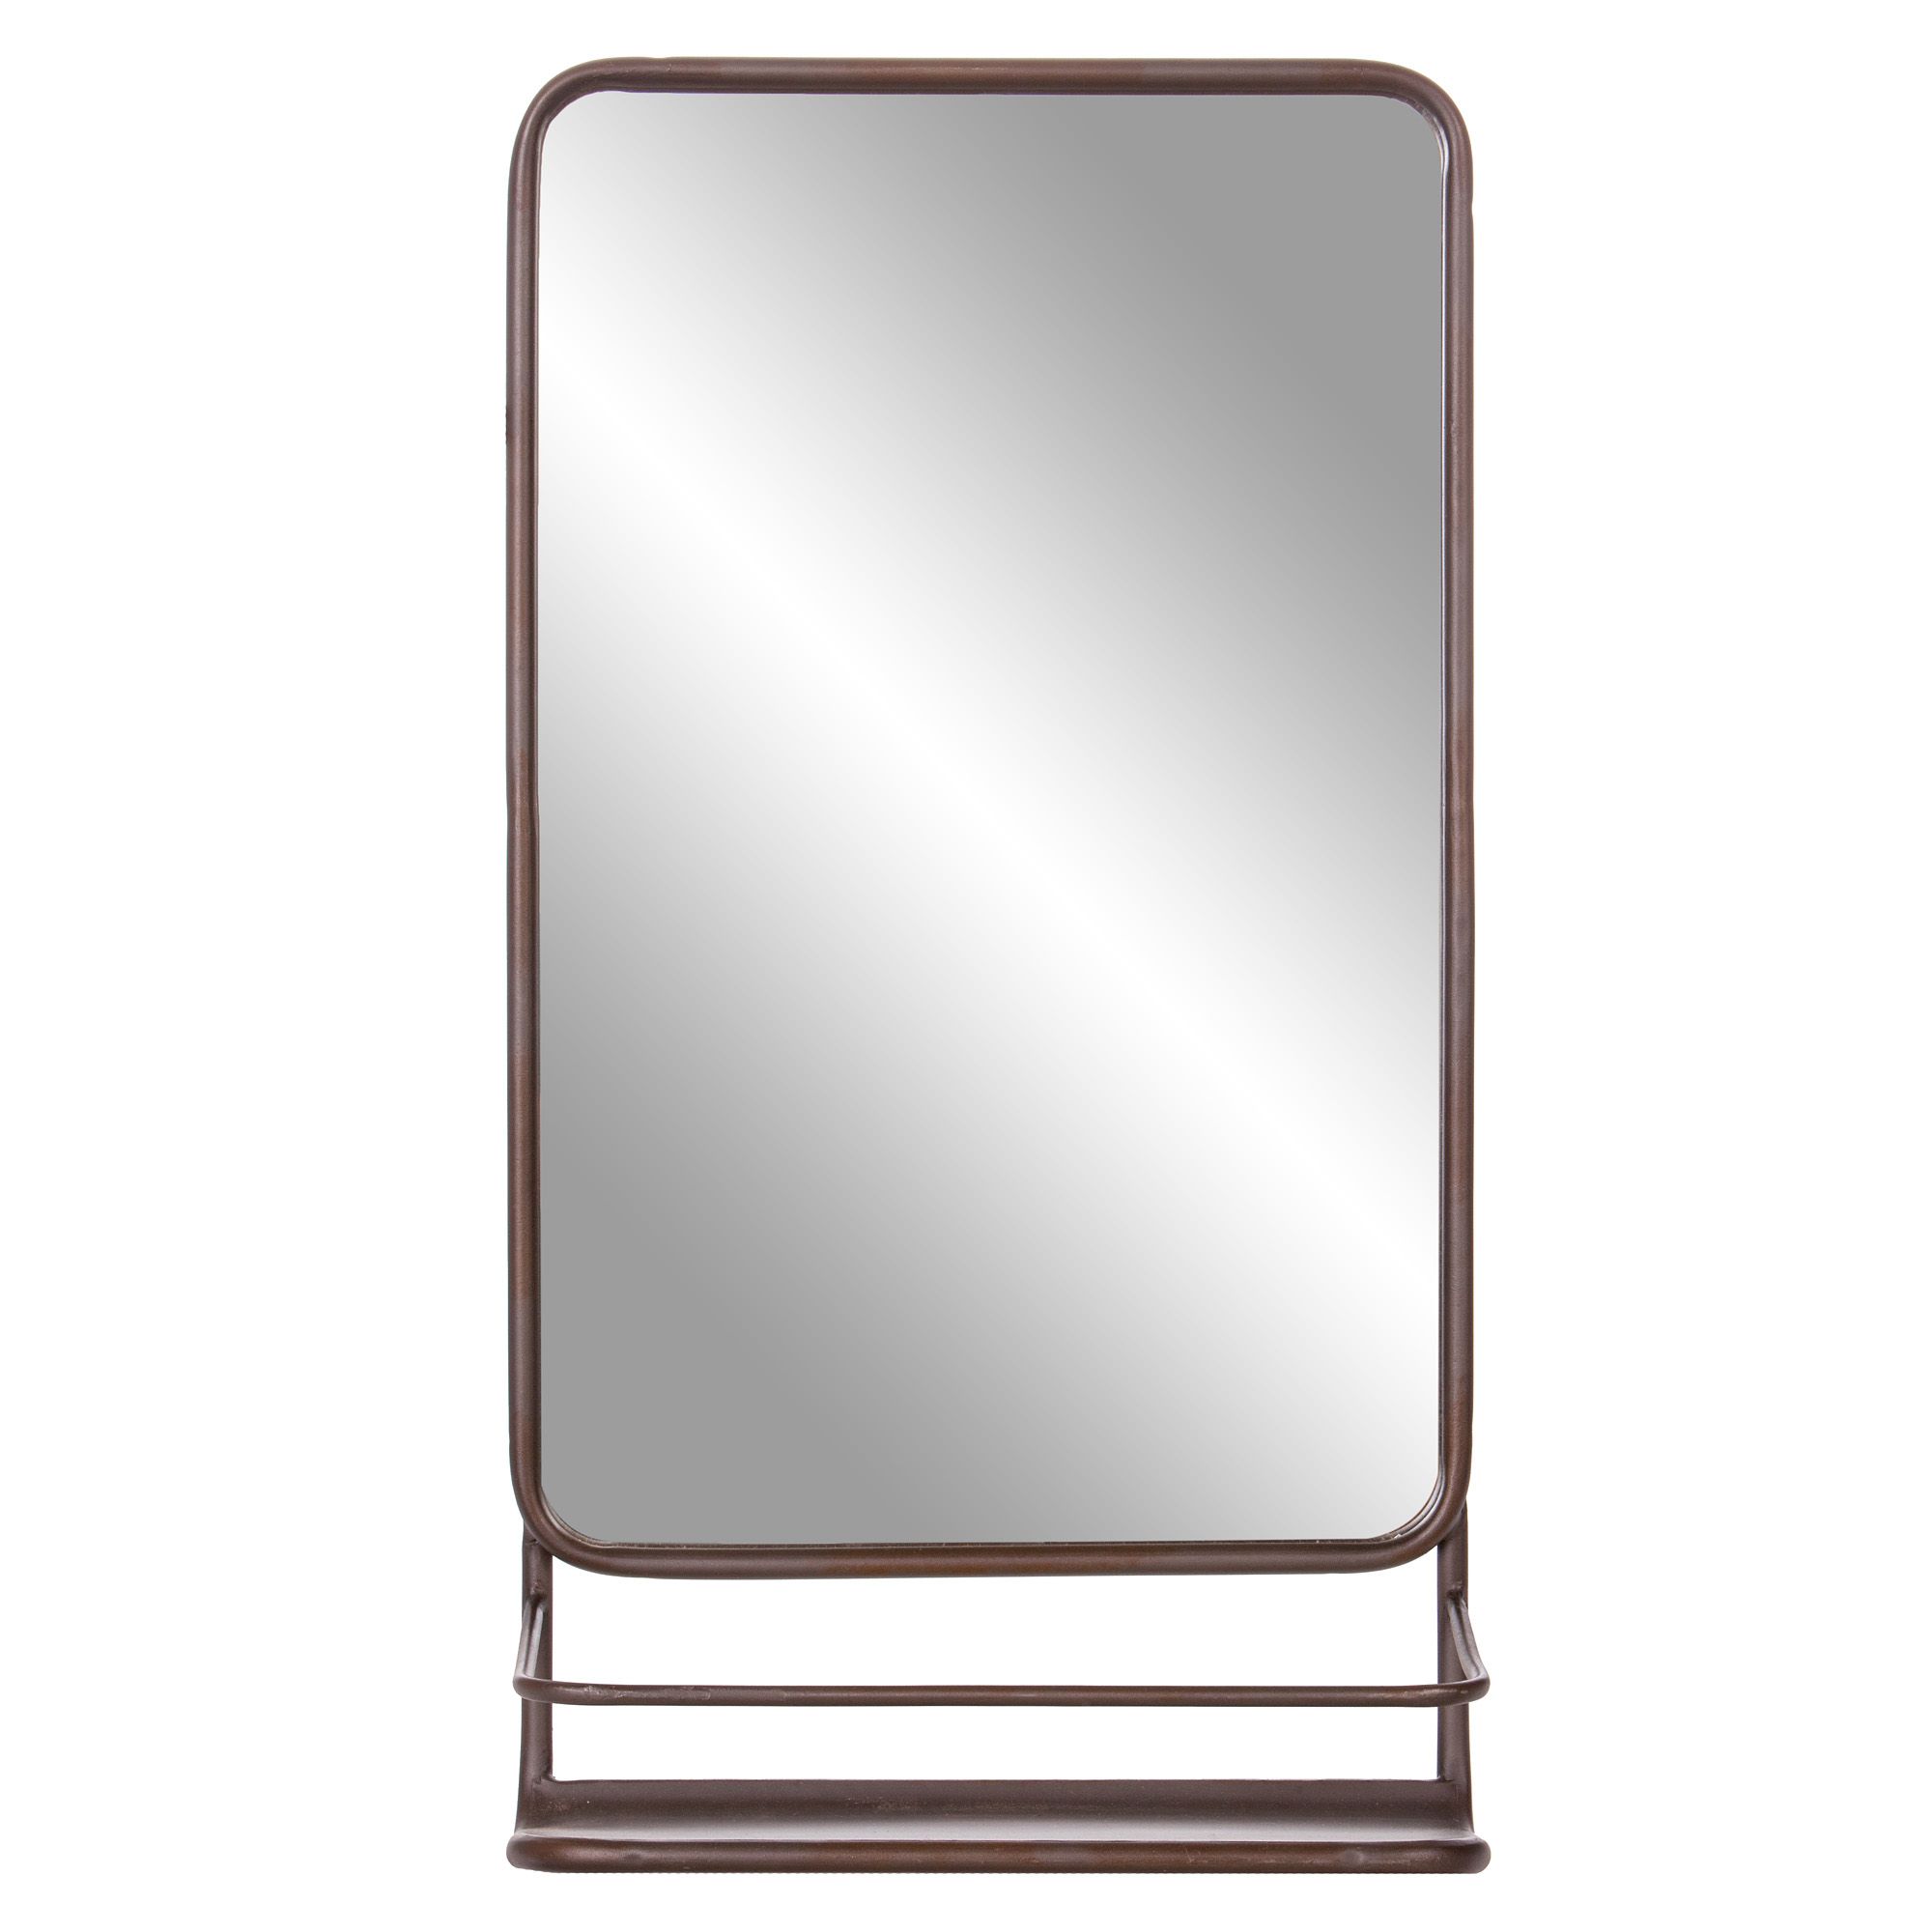 Bronze Metal Wall Accent Mirror With Shelf – Walmart Intended For Woven Bronze Metal Wall Mirrors (View 10 of 15)